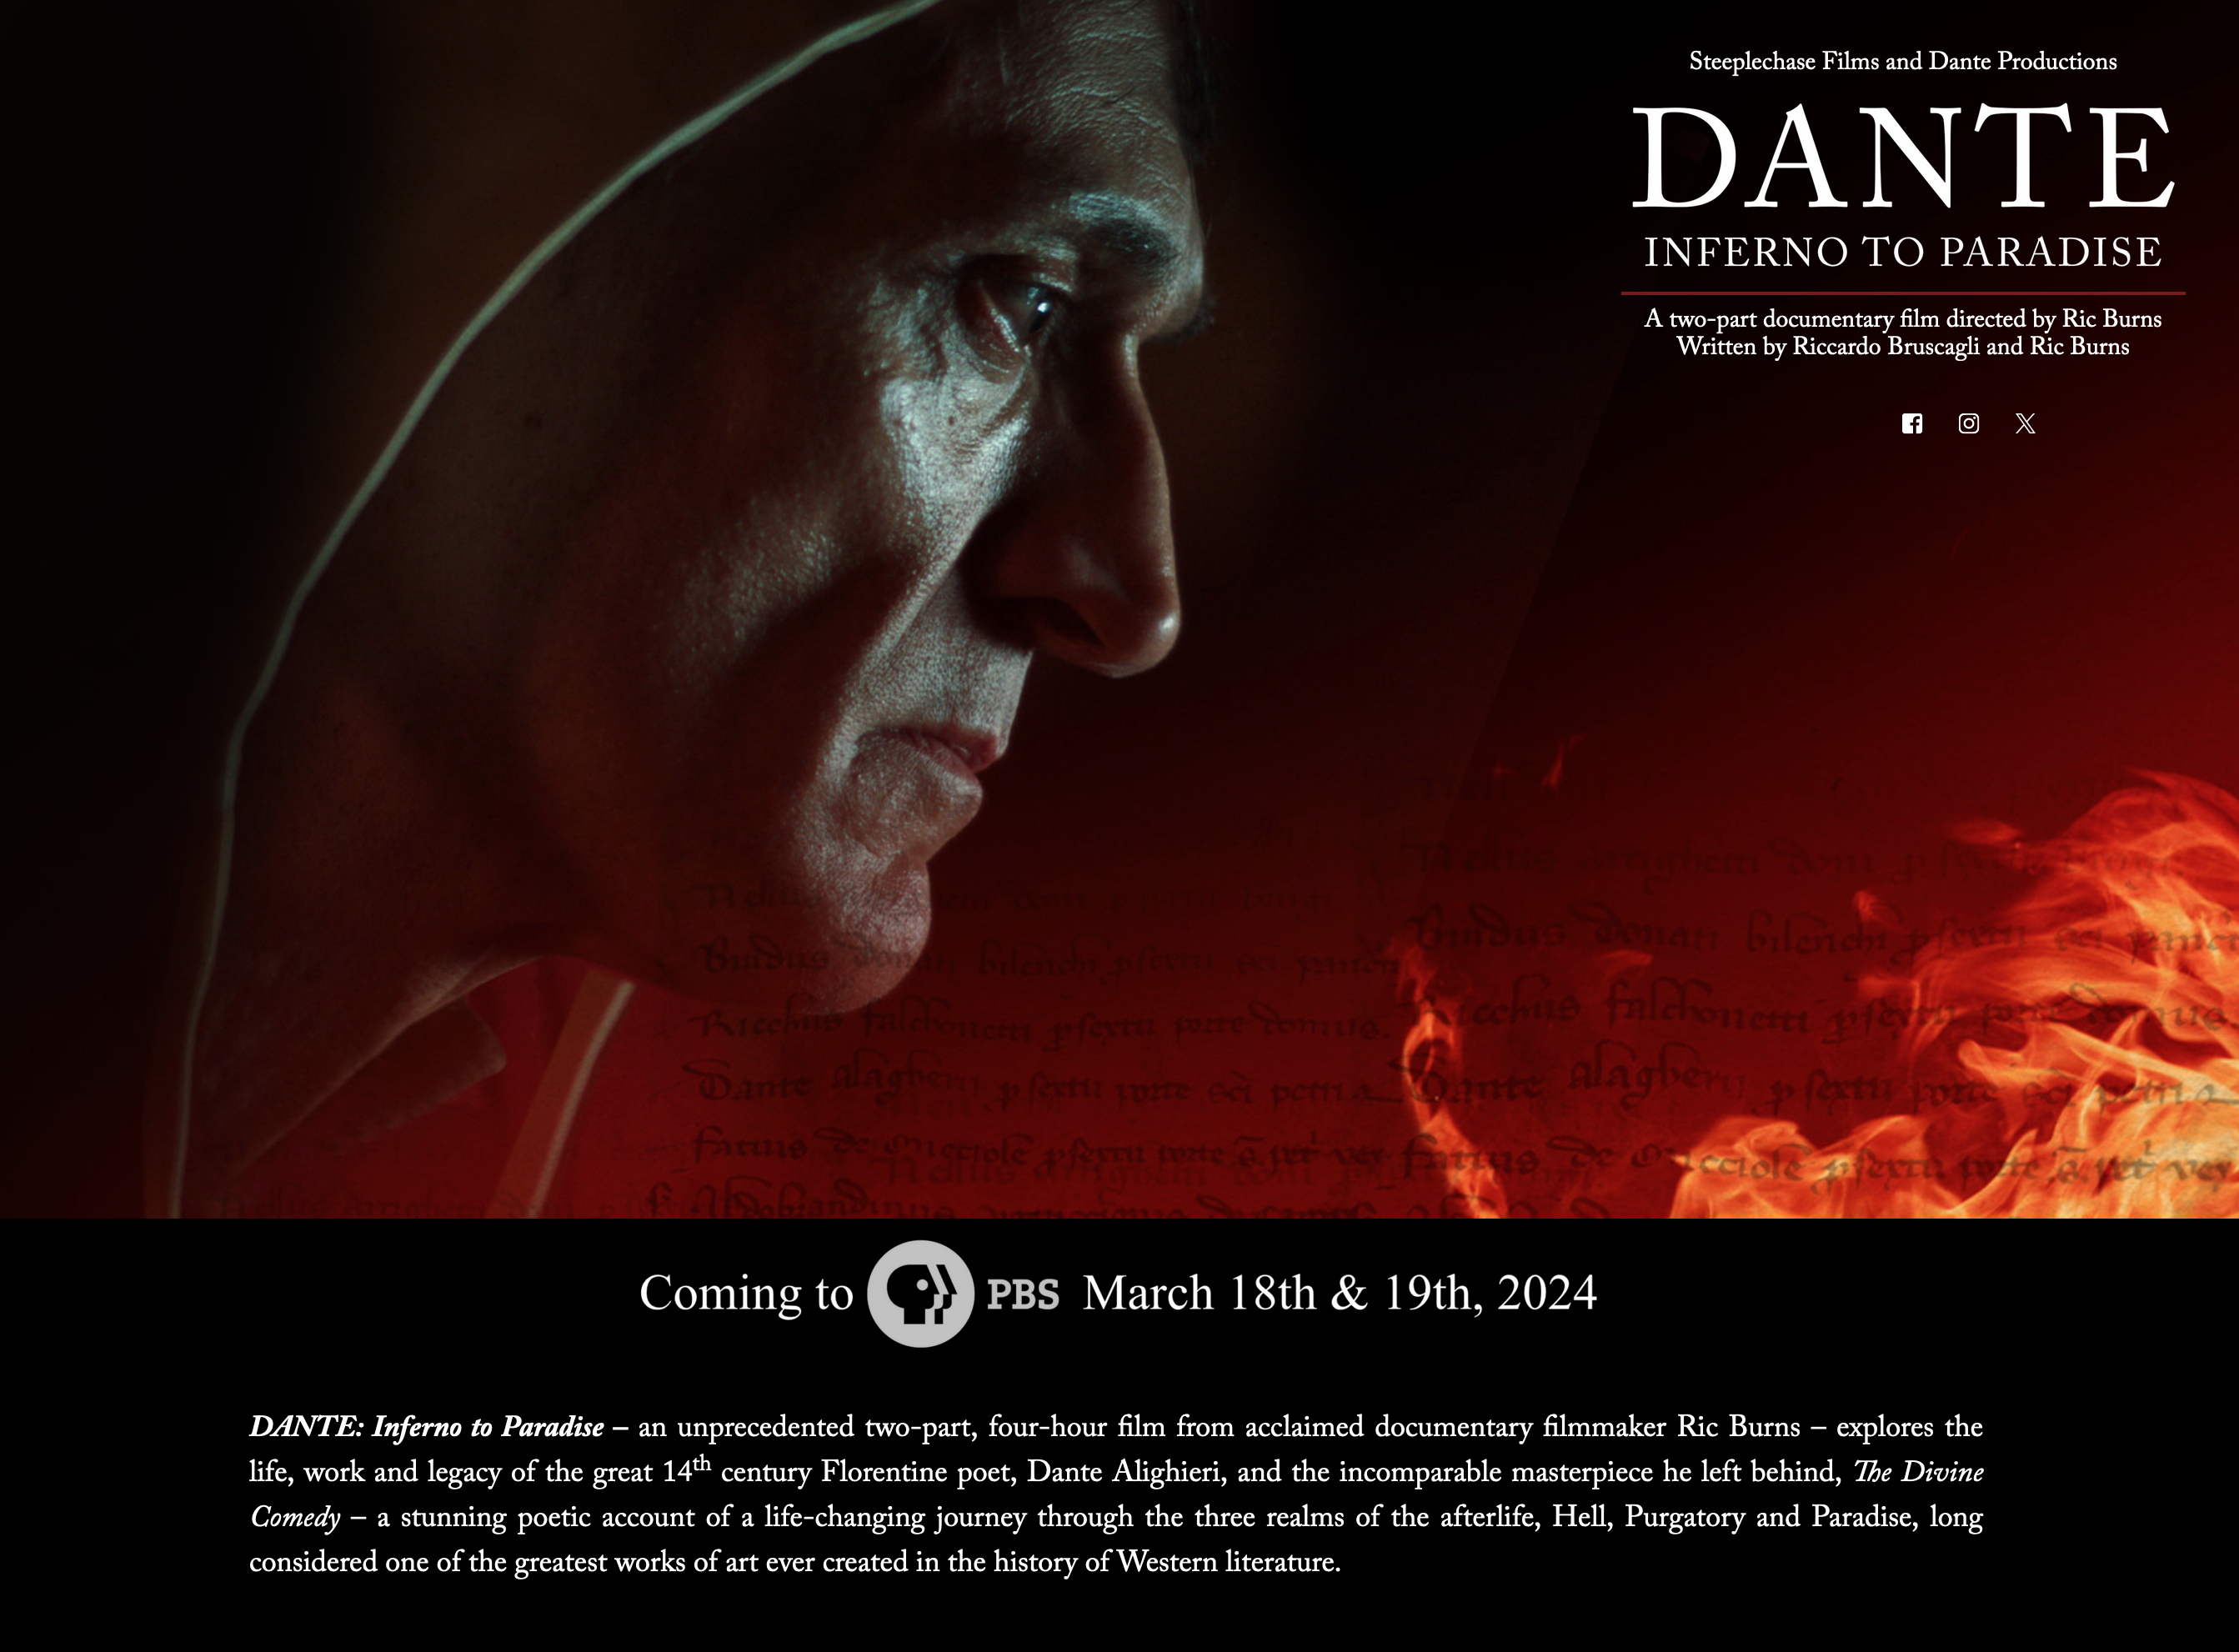 DANTE: Inferno to Paradise from Ric Burns and Steeplechase Films